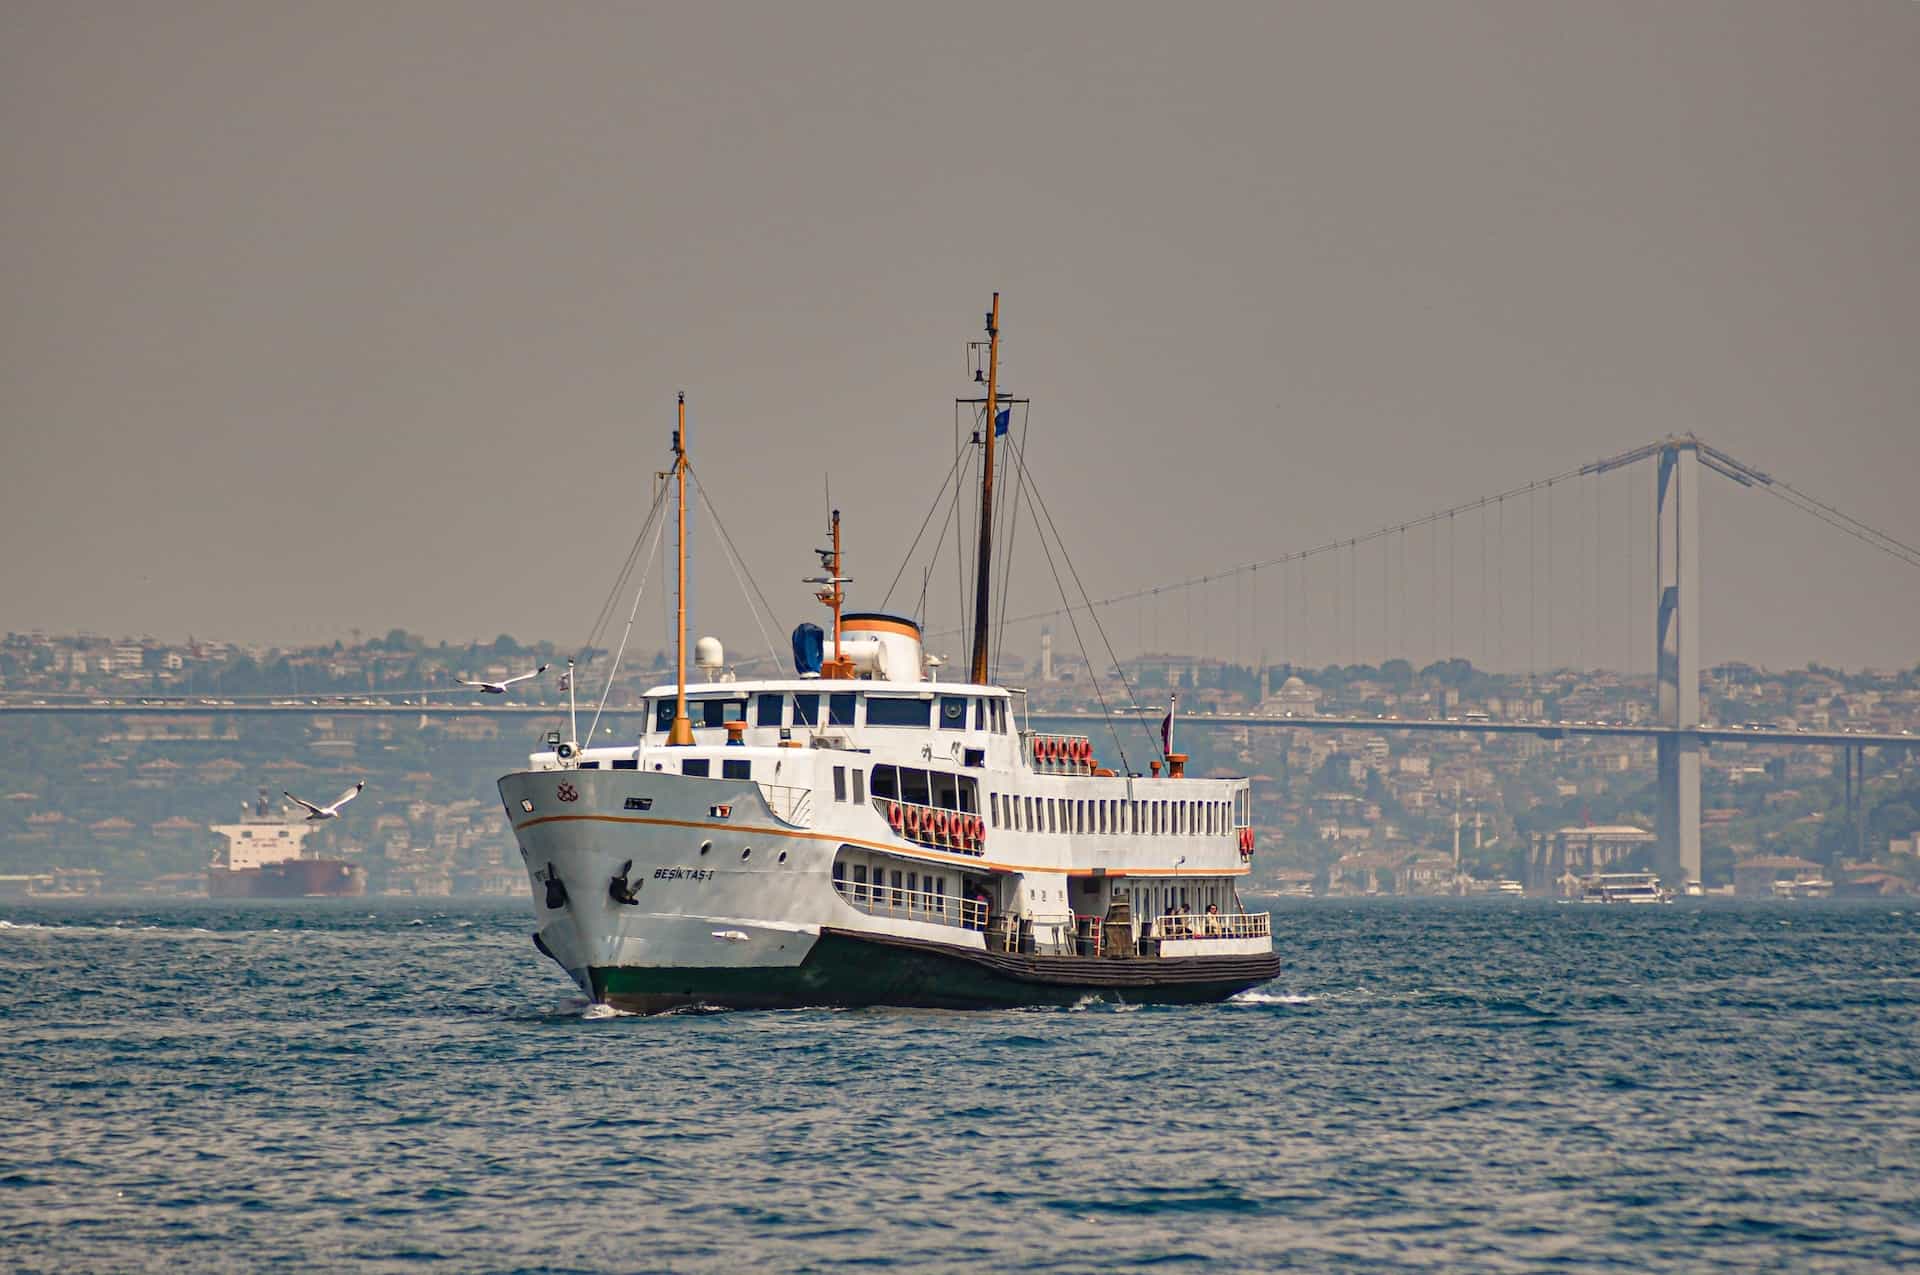 Bosphorus public ferries are frequent and an experience in an of themselves.